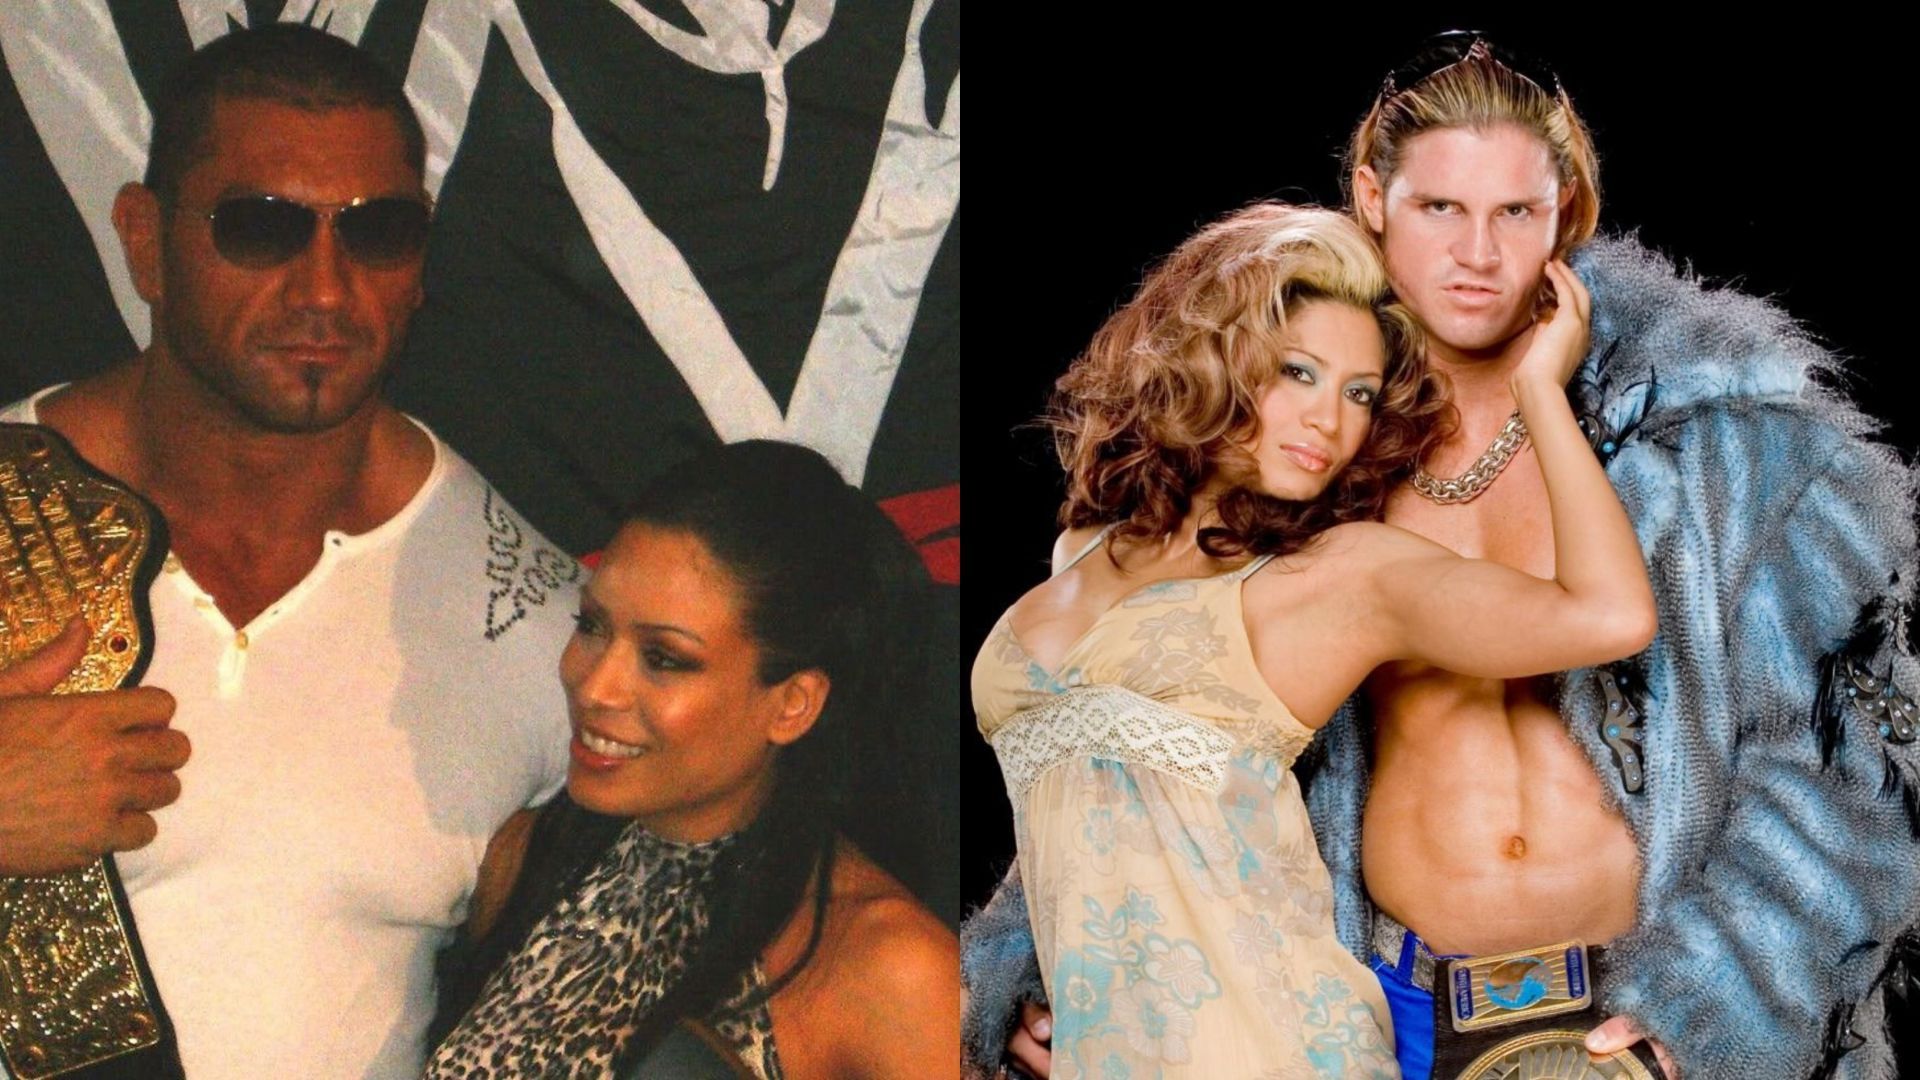 Melina with Batista (left) and with Johnny Mundo (right)